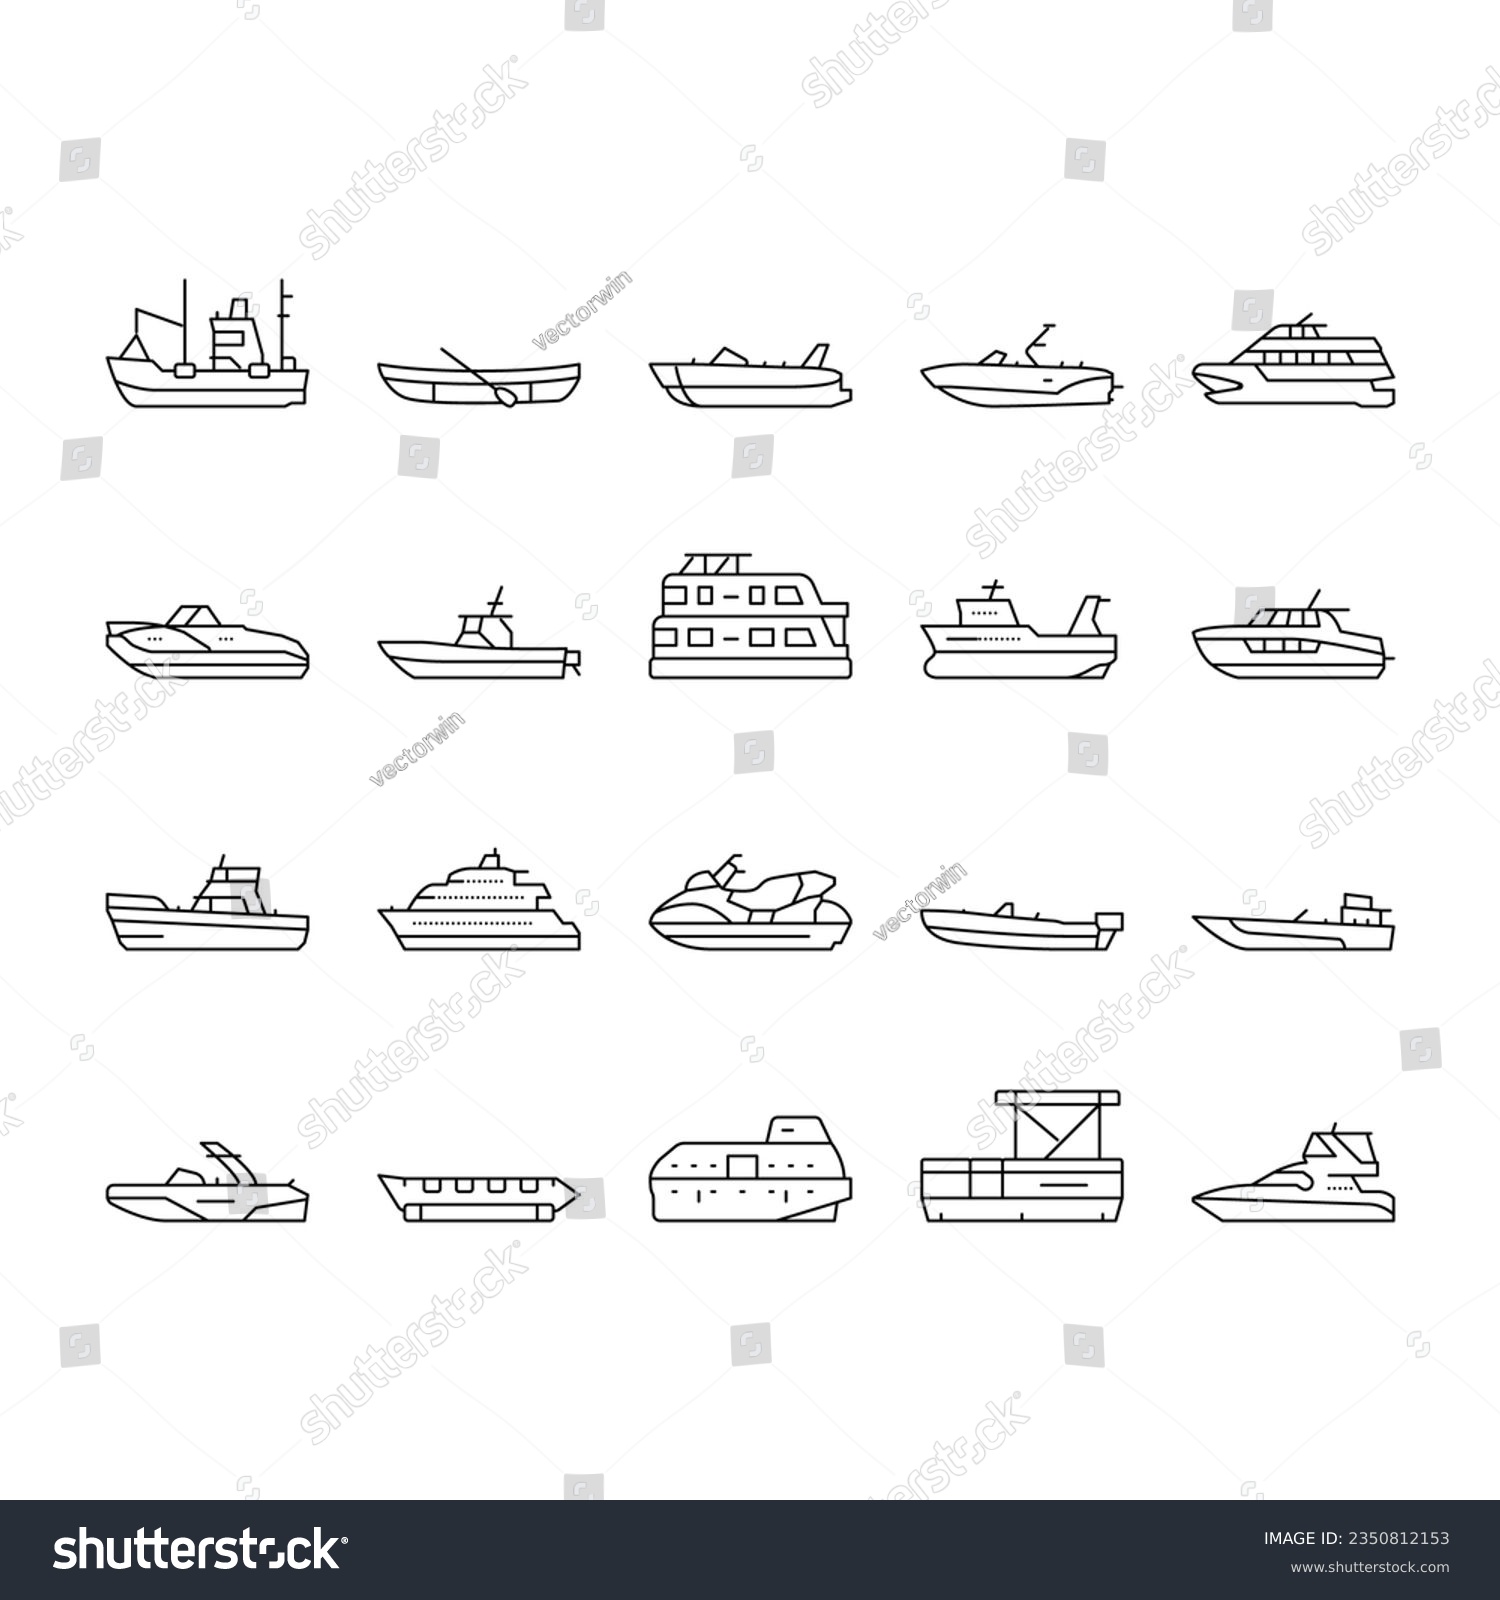 SVG of Boat Water Transportation Types Icons Set Vector. Runabout And Catamaran, Fishing And Bowrider, Motor Yacht And Cabin Cruiser Boat Line. Ship And Motorboat Transport Black Contour Illustrations svg